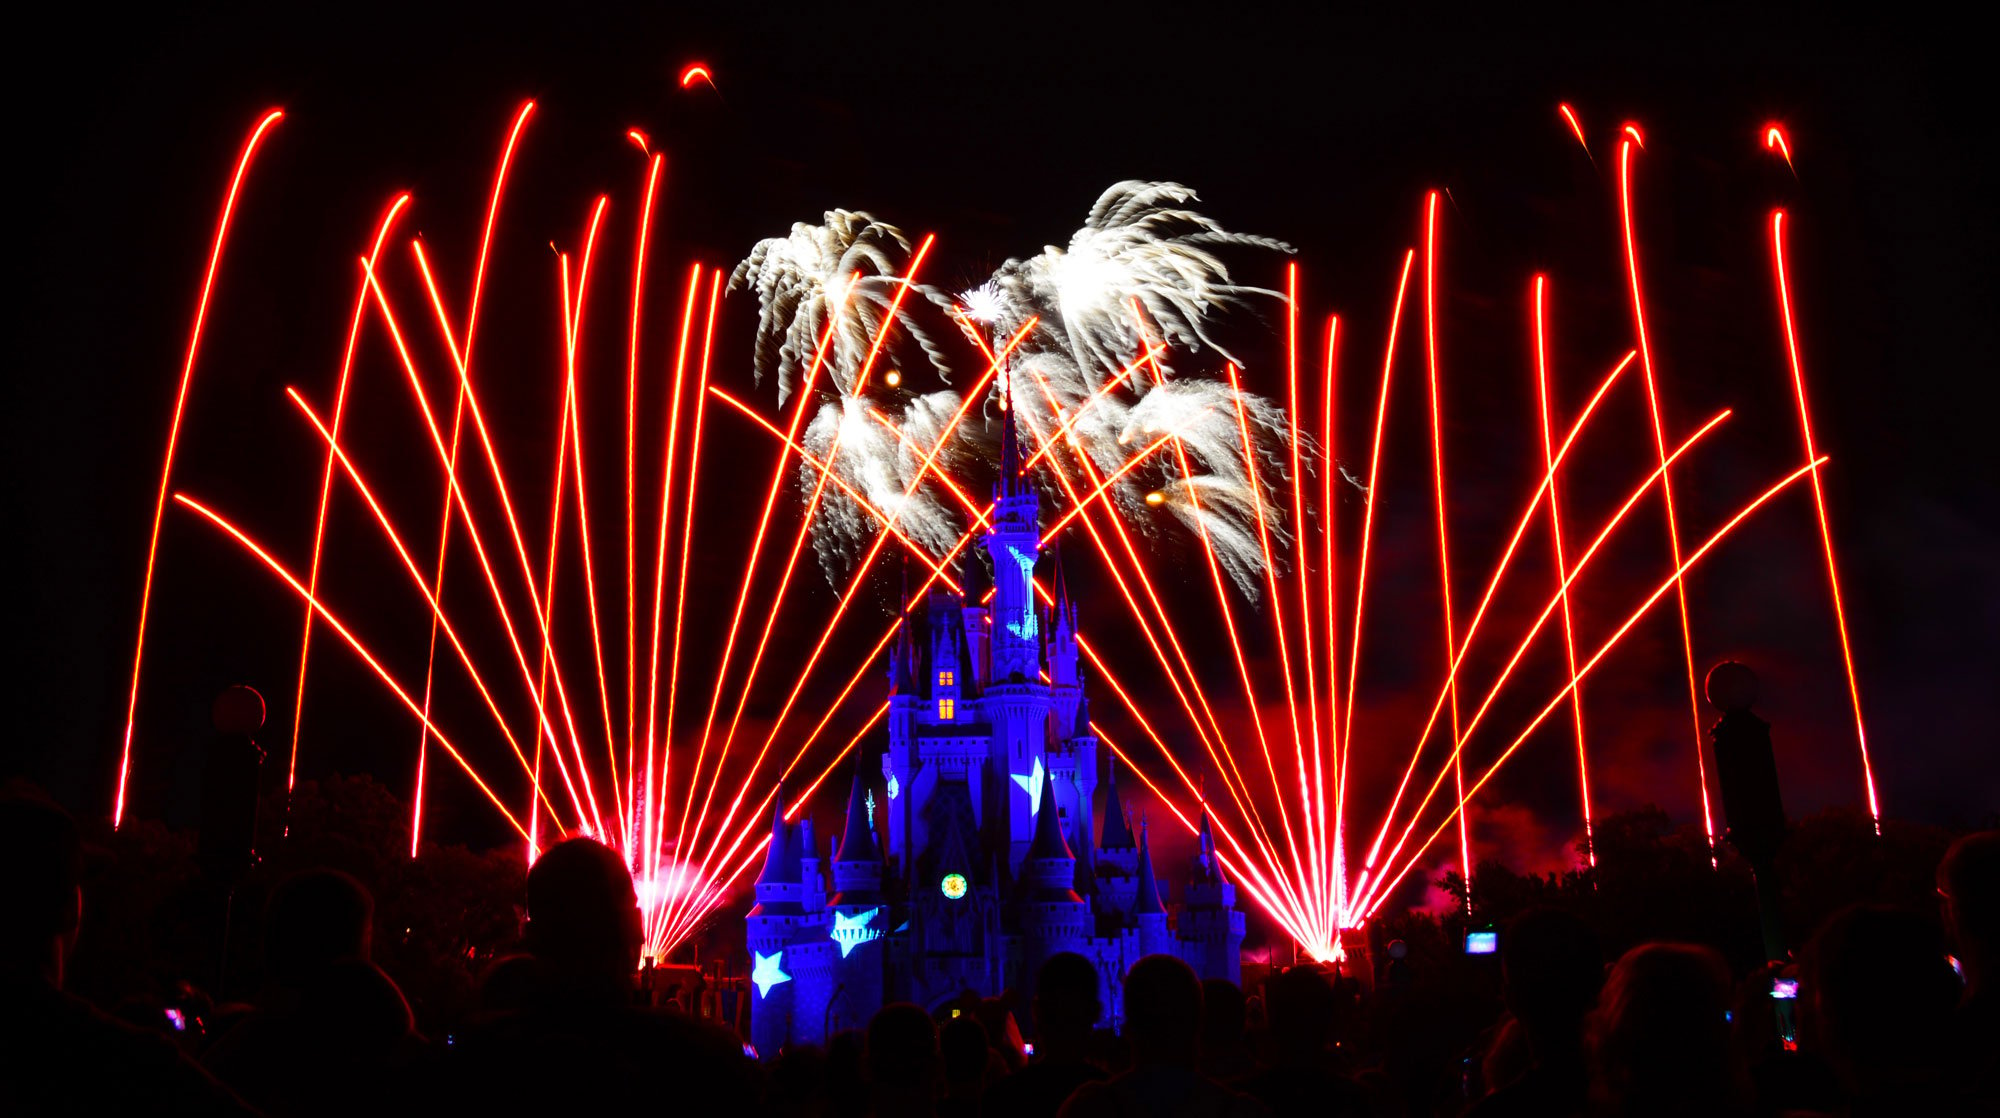 Disney After Hours offers reduced tickets